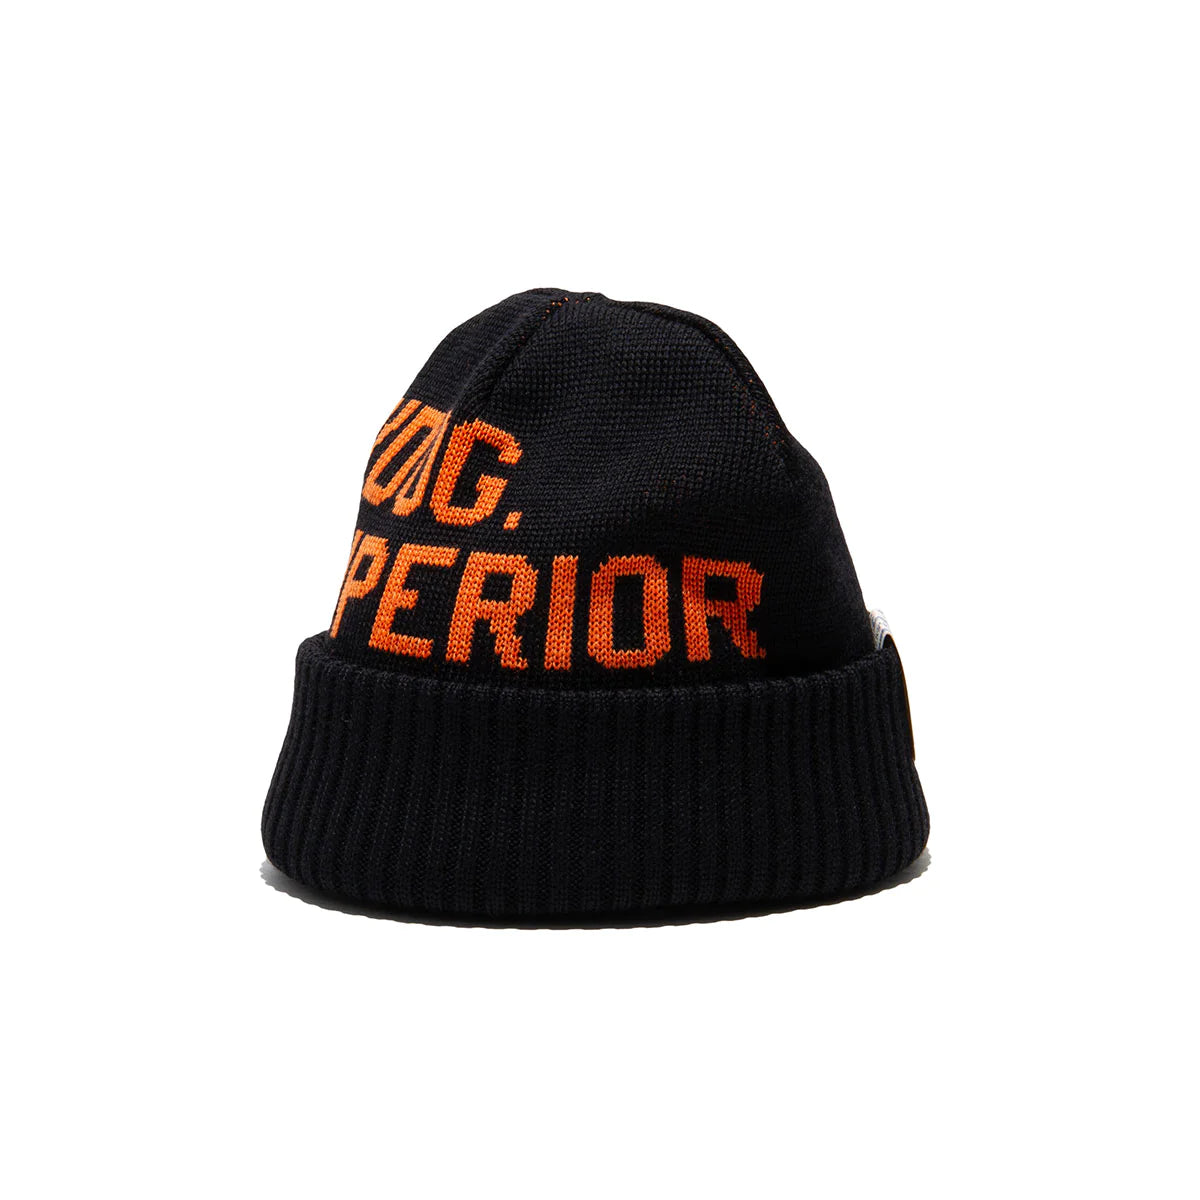 The H.W. Dog & Co - FACEMASK BEANIE - Black – Bad Weather Cafe